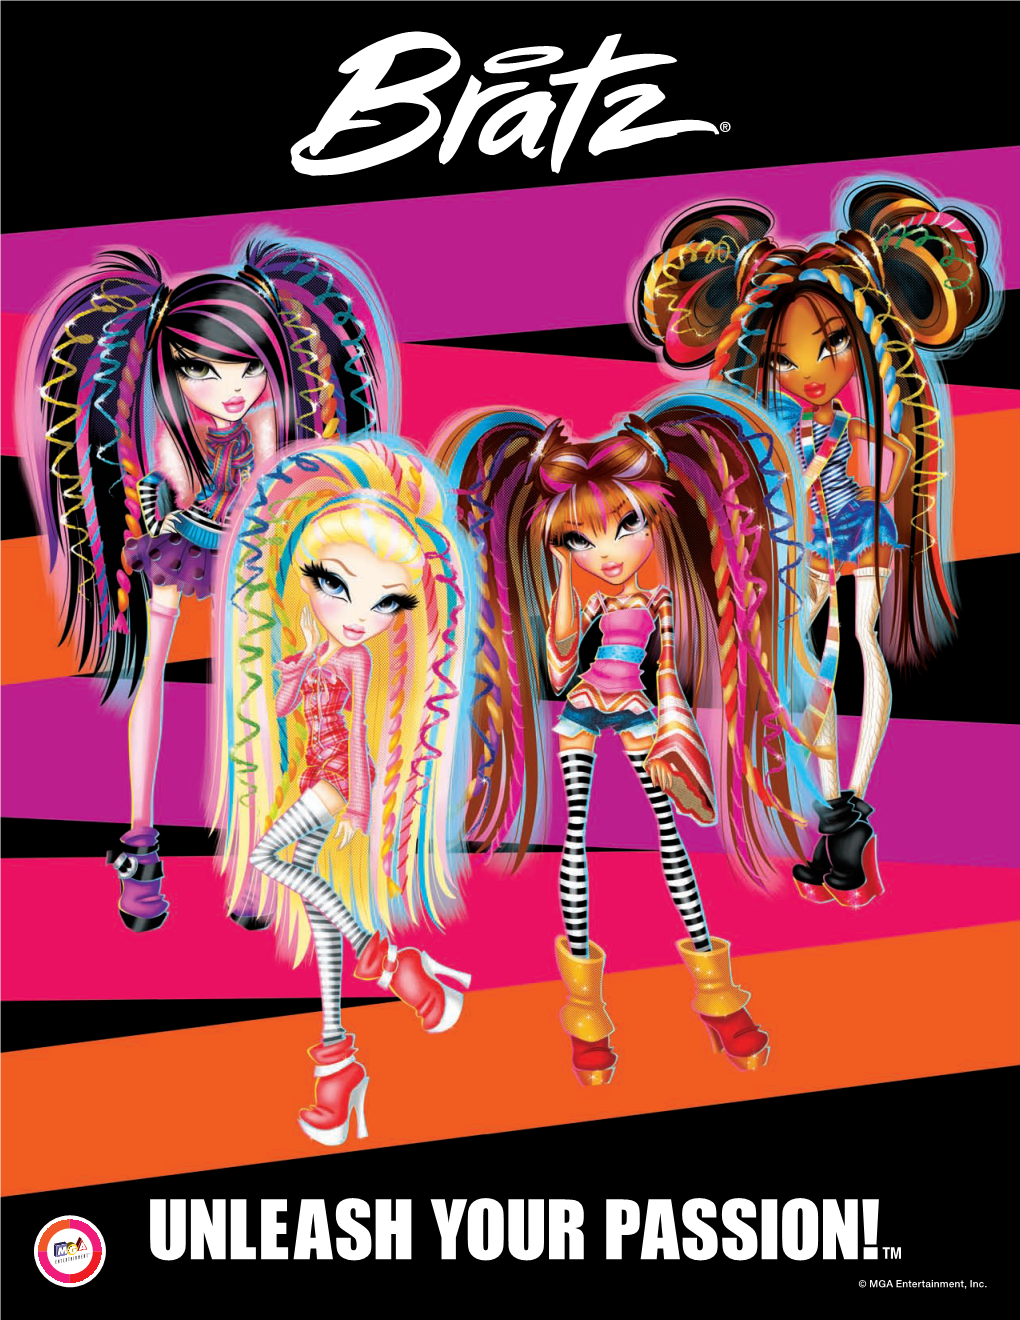 © MGA Entertainment, Inc. BRAND ESSENCE Bratz ® Girls Are Leaders, Gamer Changers and Best Friends